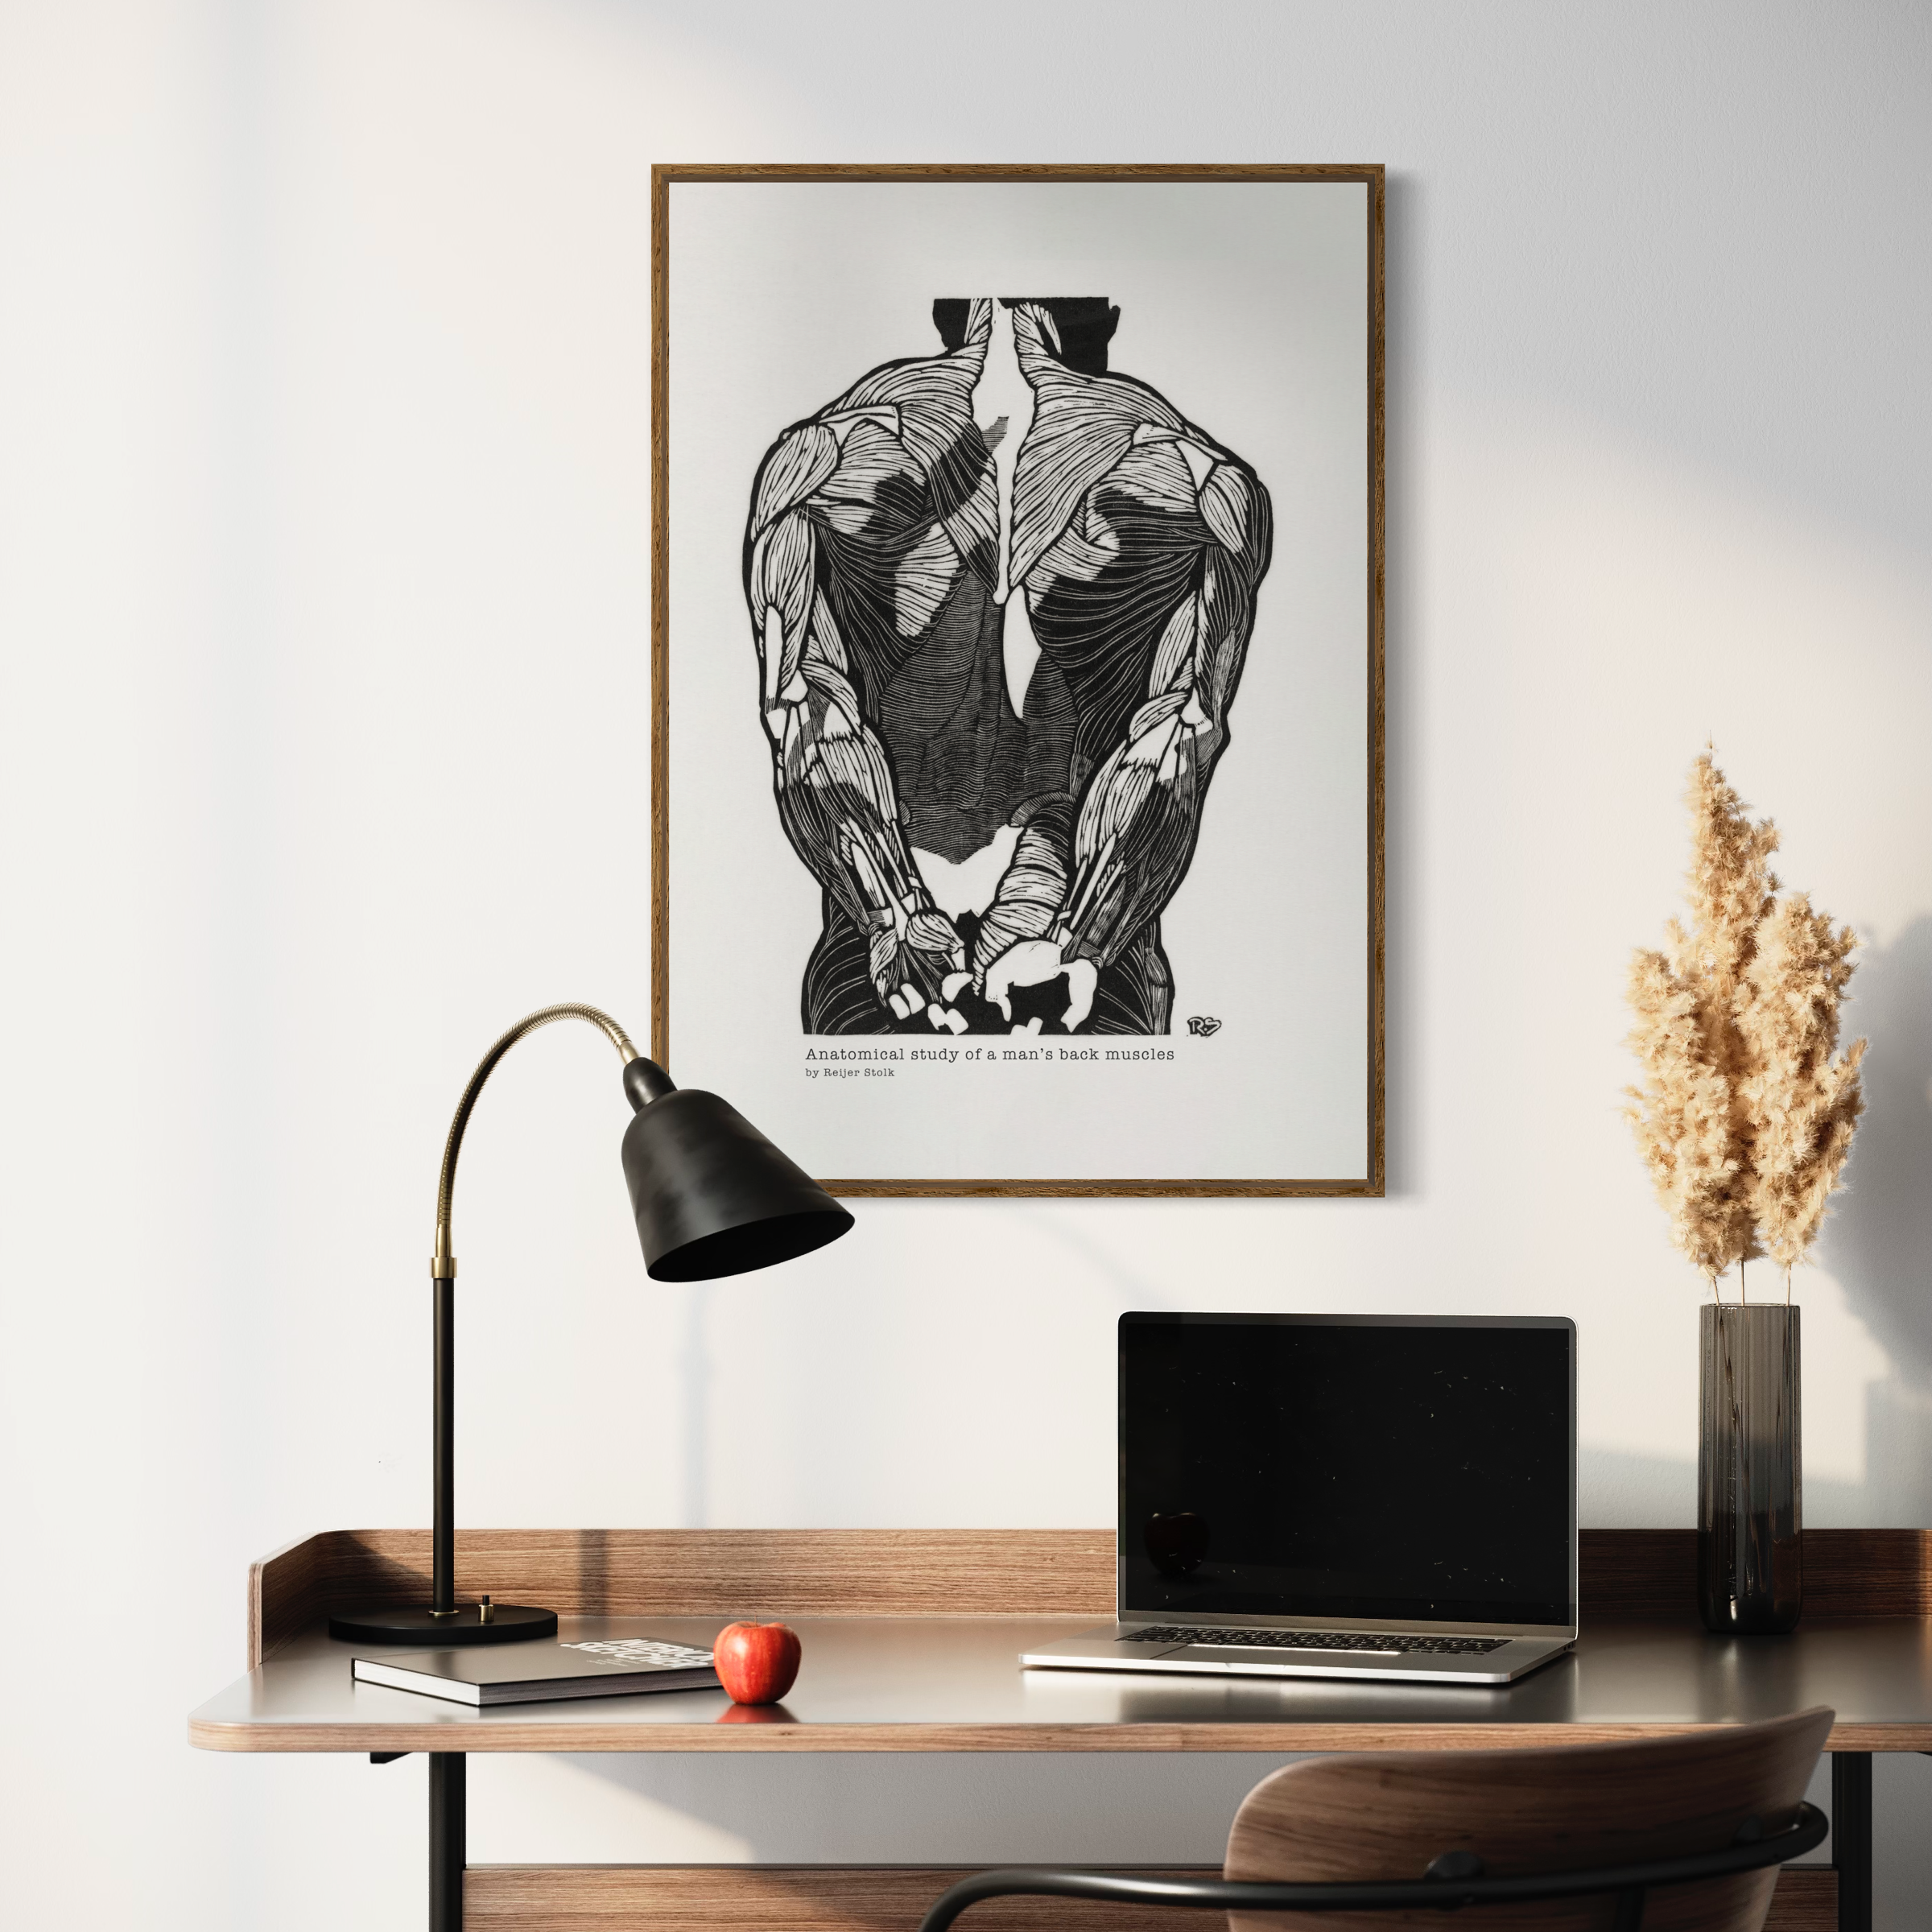 Reijer Stolk Poster - Anatomical study of a man's back muscles No 1